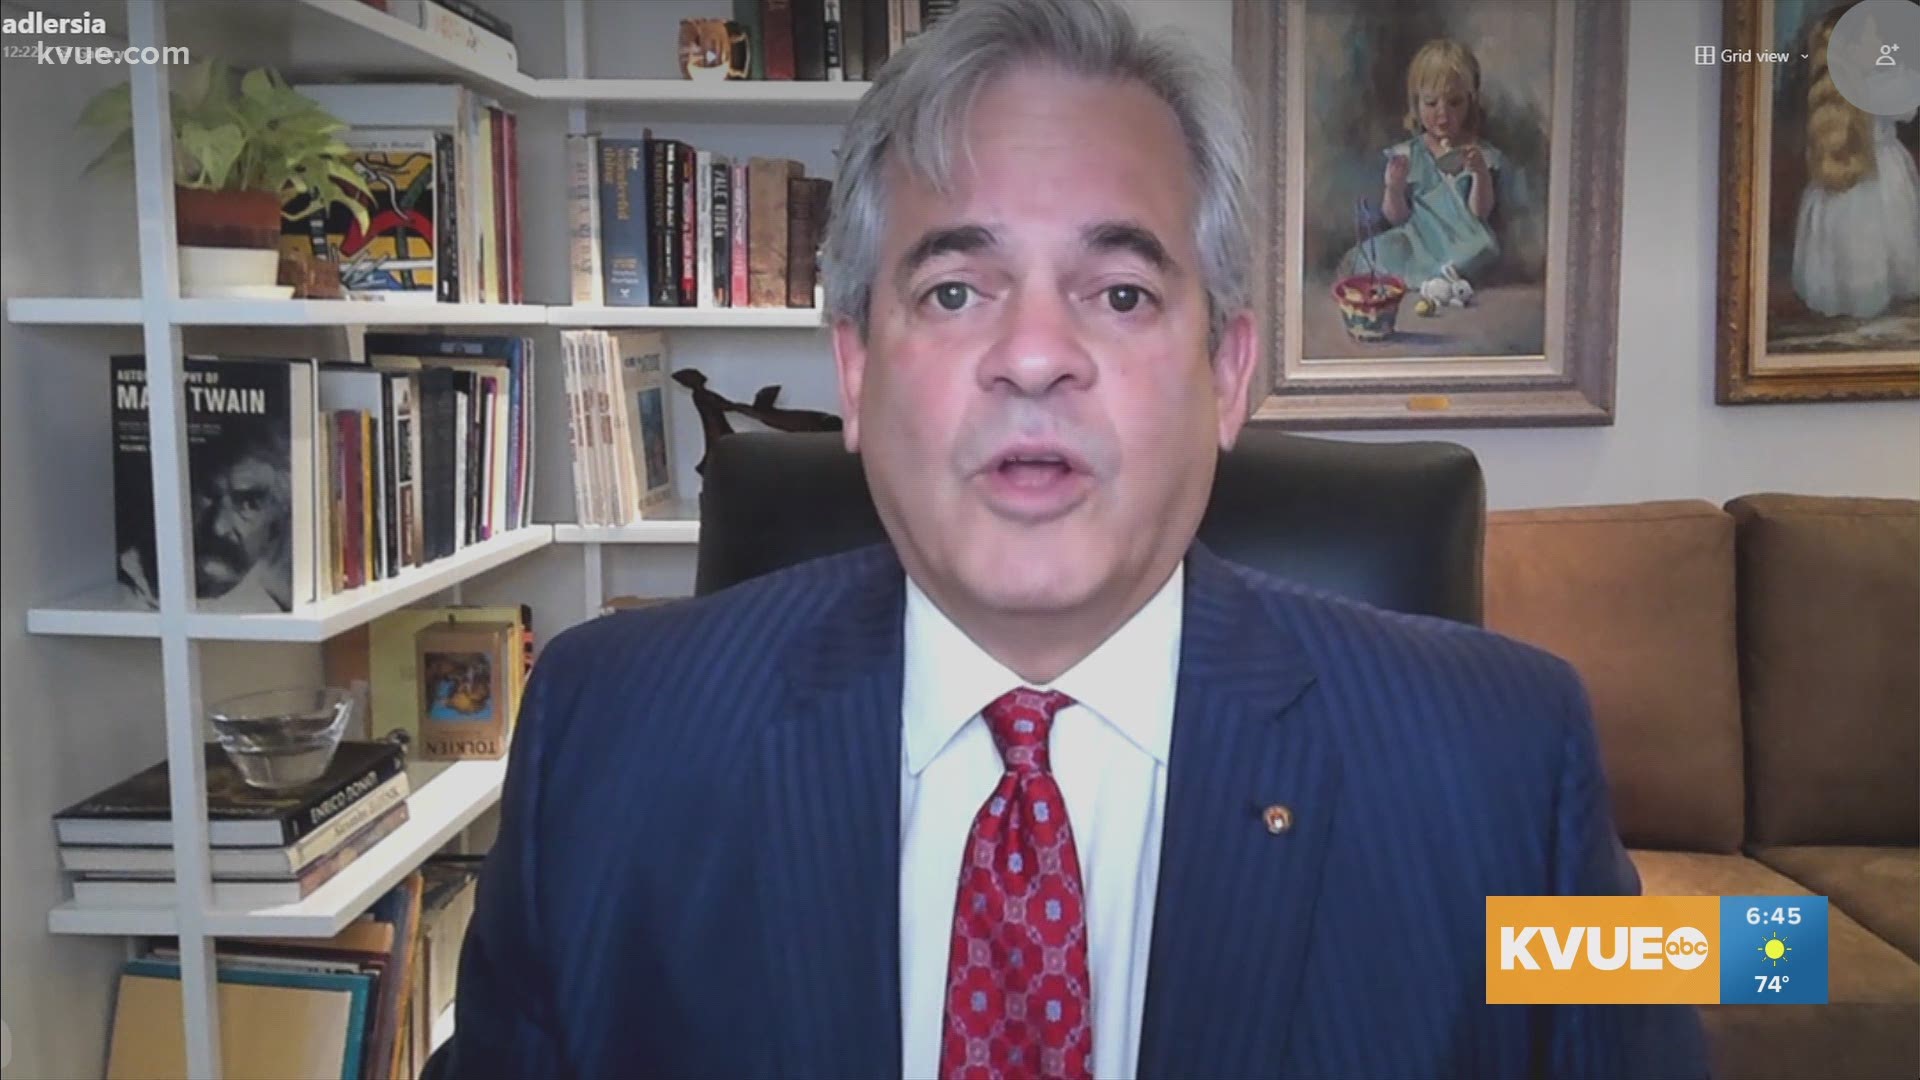 Between the public camping ban and the COVID-19 pandemic, there's a lot happening in Austin. Austin Mayor Steve Adler joined KVUE Daybreak to discuss.